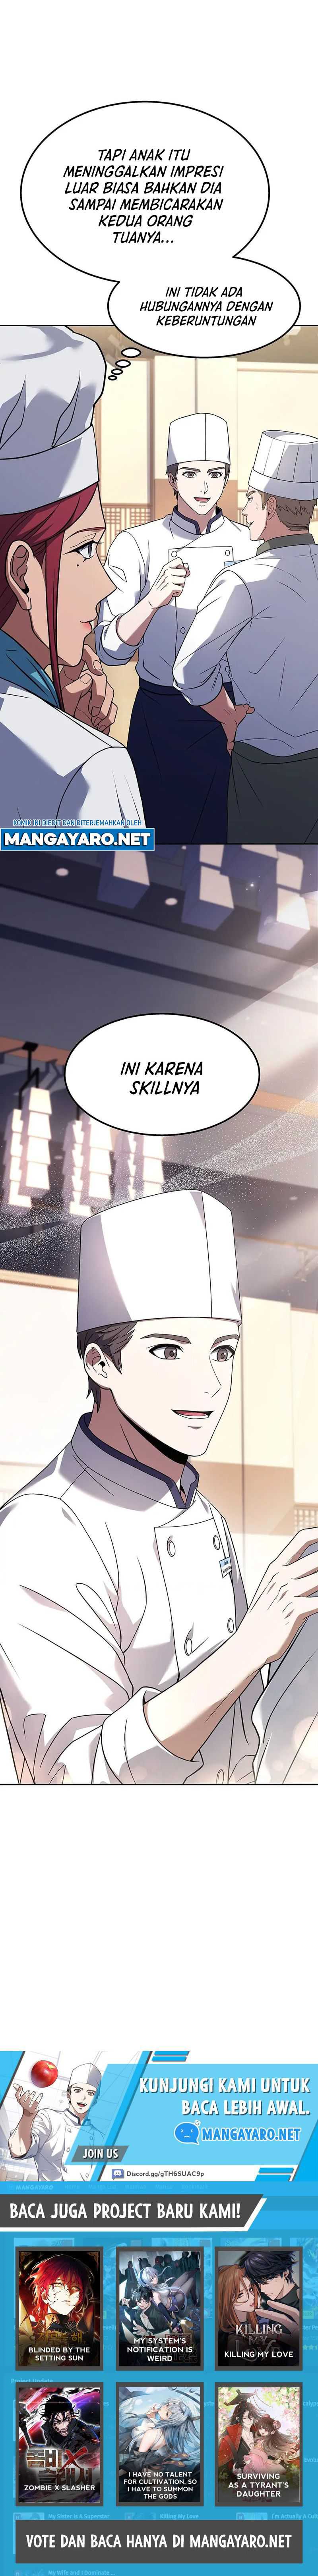 Youngest Chef From the 3rd Rate Hotel Chapter 64